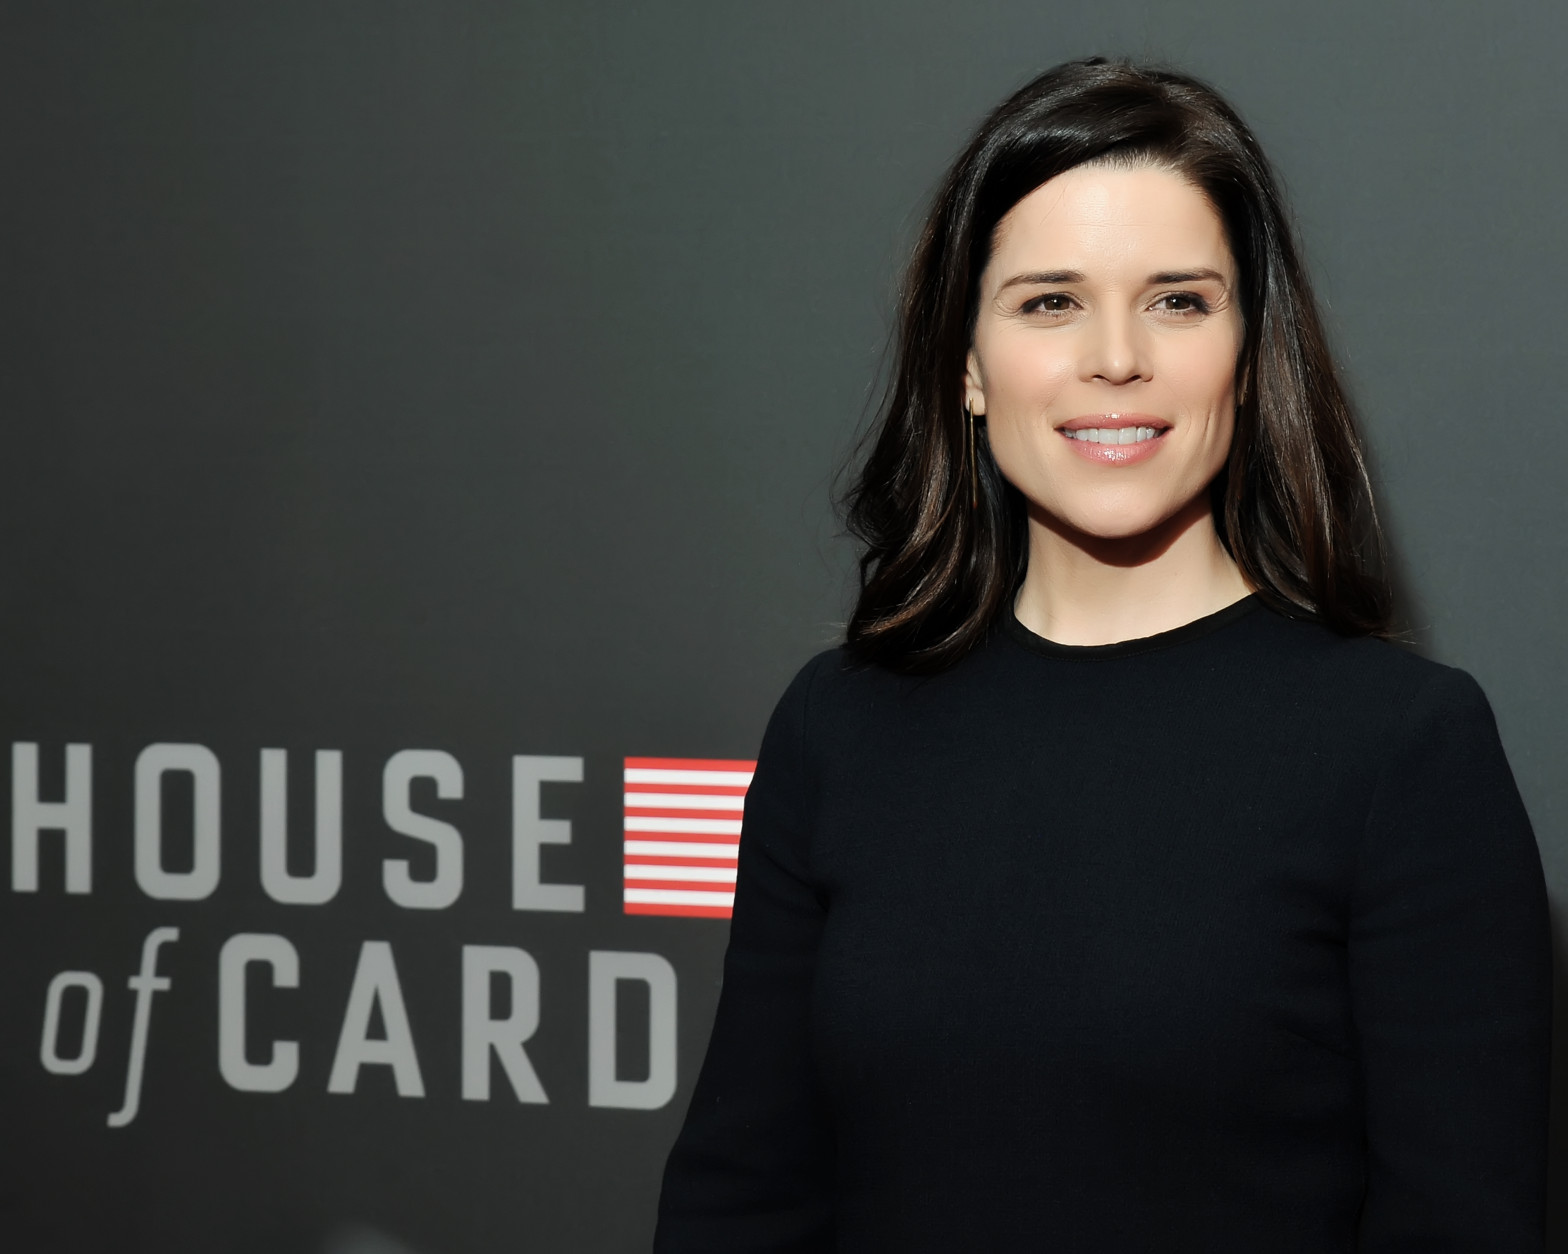 Neve Campbell on the red carpet at the National Portrait Gallery in D.C. on Feb. 22, 2016.  (Courtesy Shannon Finney, www.shannonfinneyphotography.com)